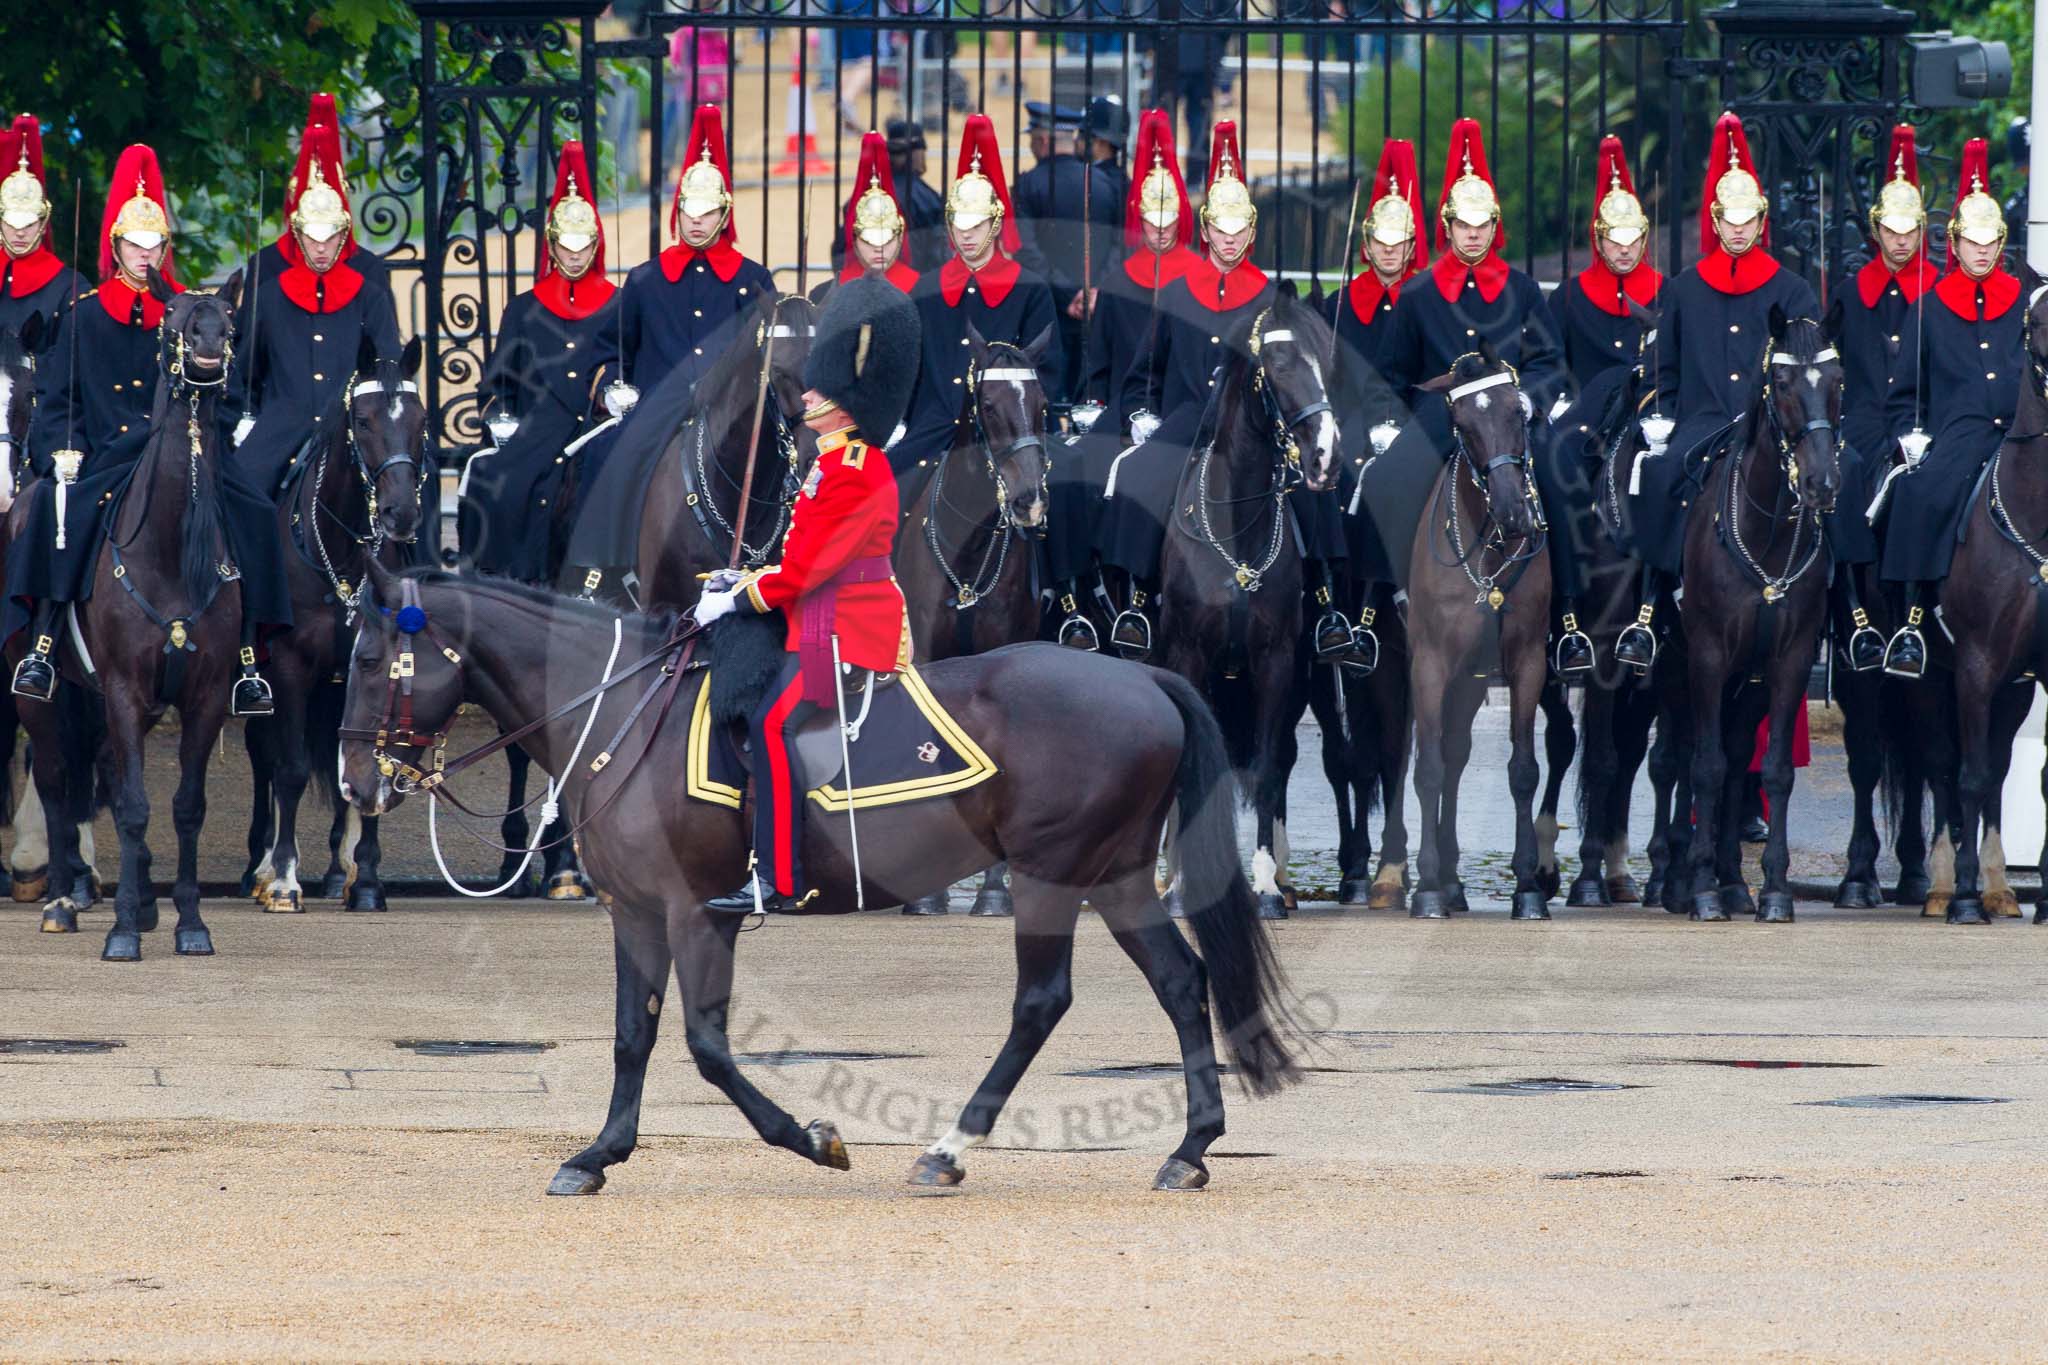 The Colonel's Review 2014.
Horse Guards Parade, Westminster,
London,

United Kingdom,
on 07 June 2014 at 11:48, image #564